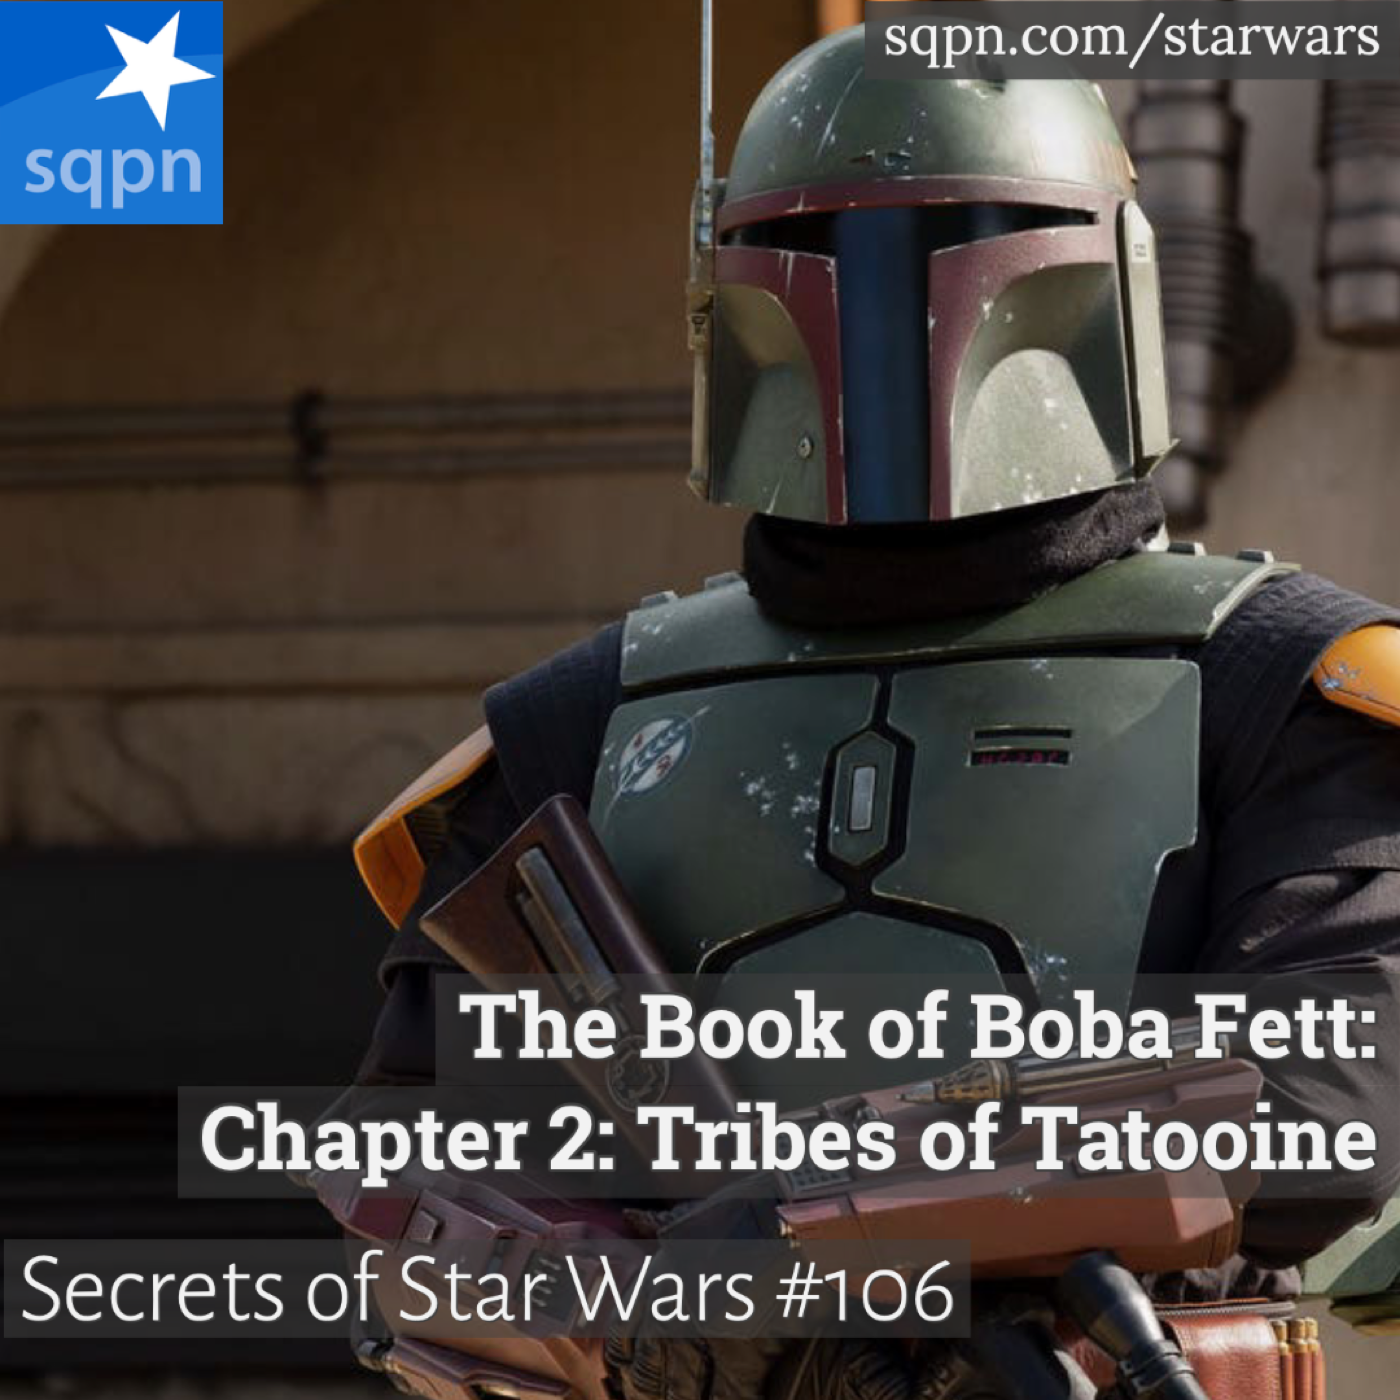 The Book of Boba Fett: Chapter 2: Tribes of Tatooine